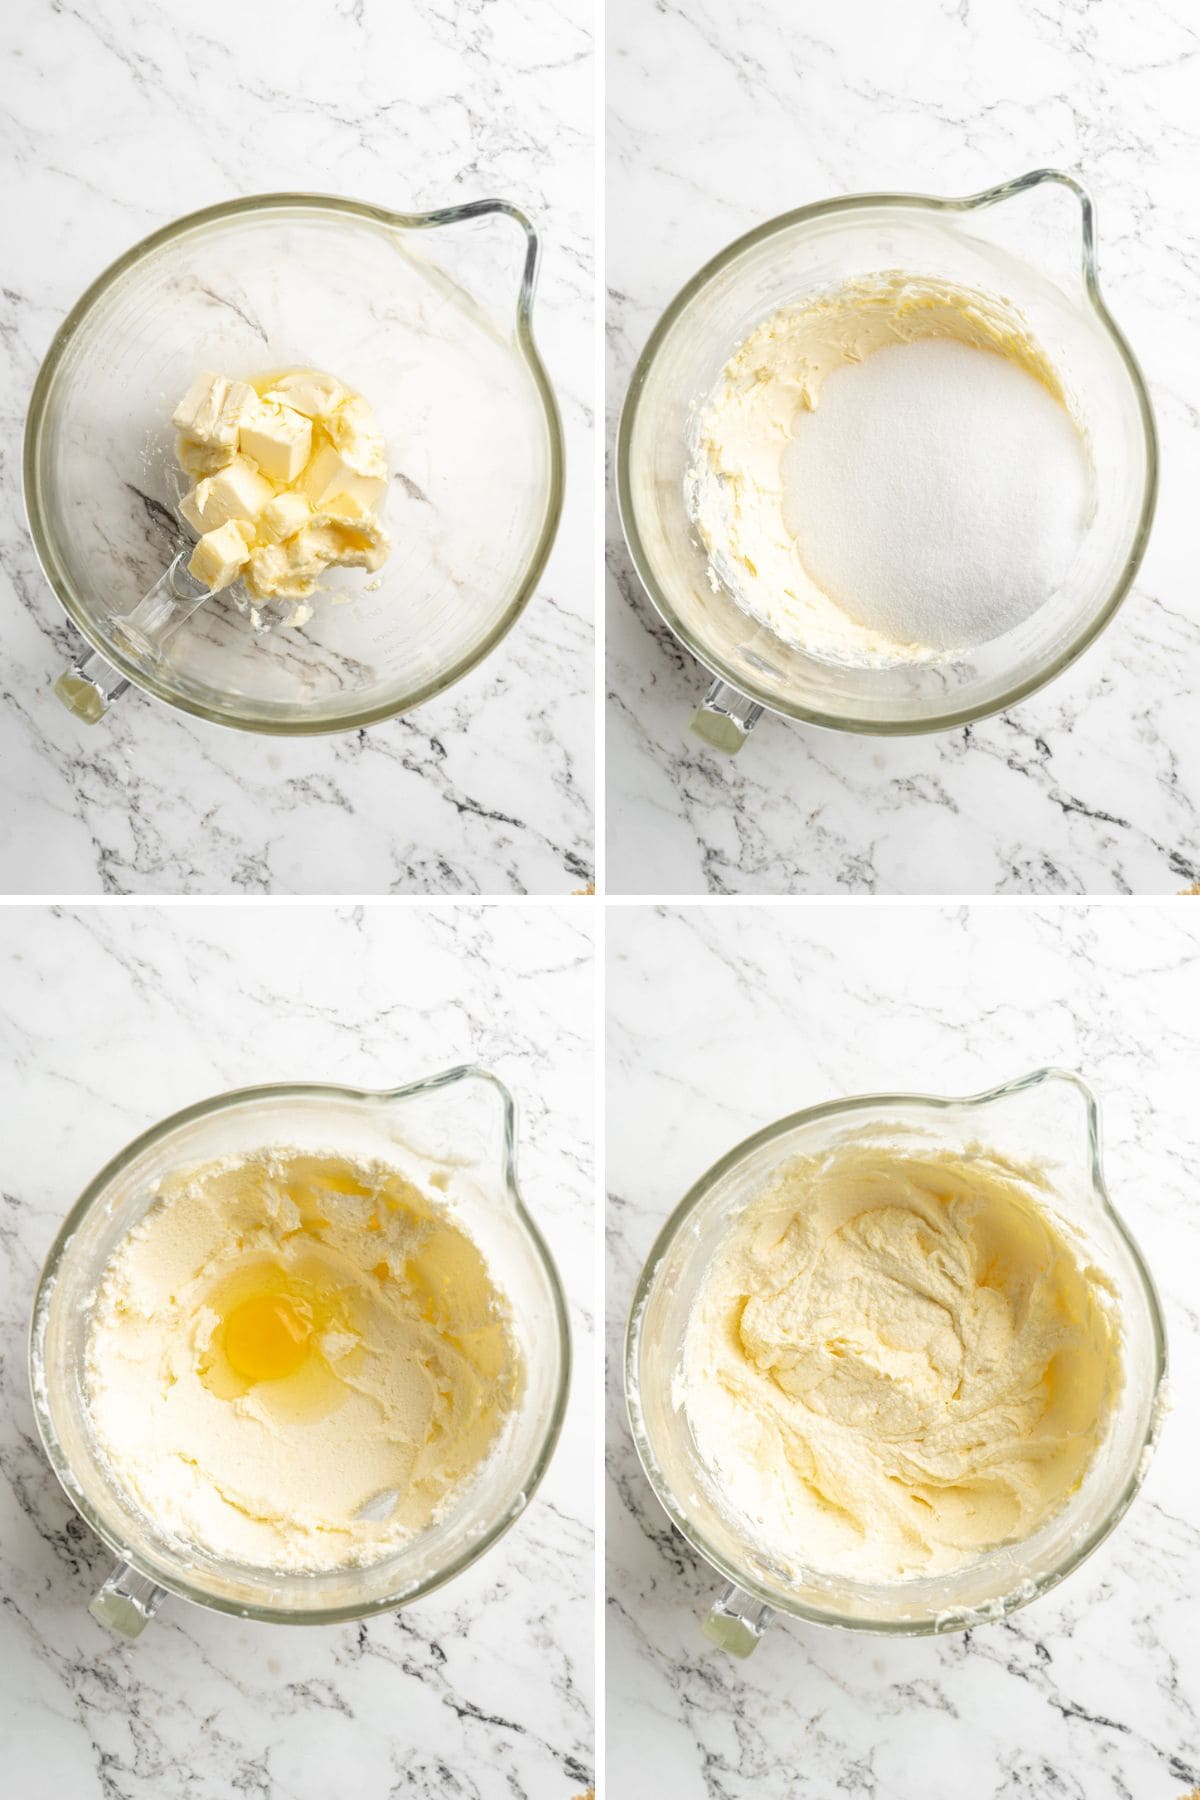 A collage of images showing creaming the butter and then adding the sugar, egg, and after it's all mixed.